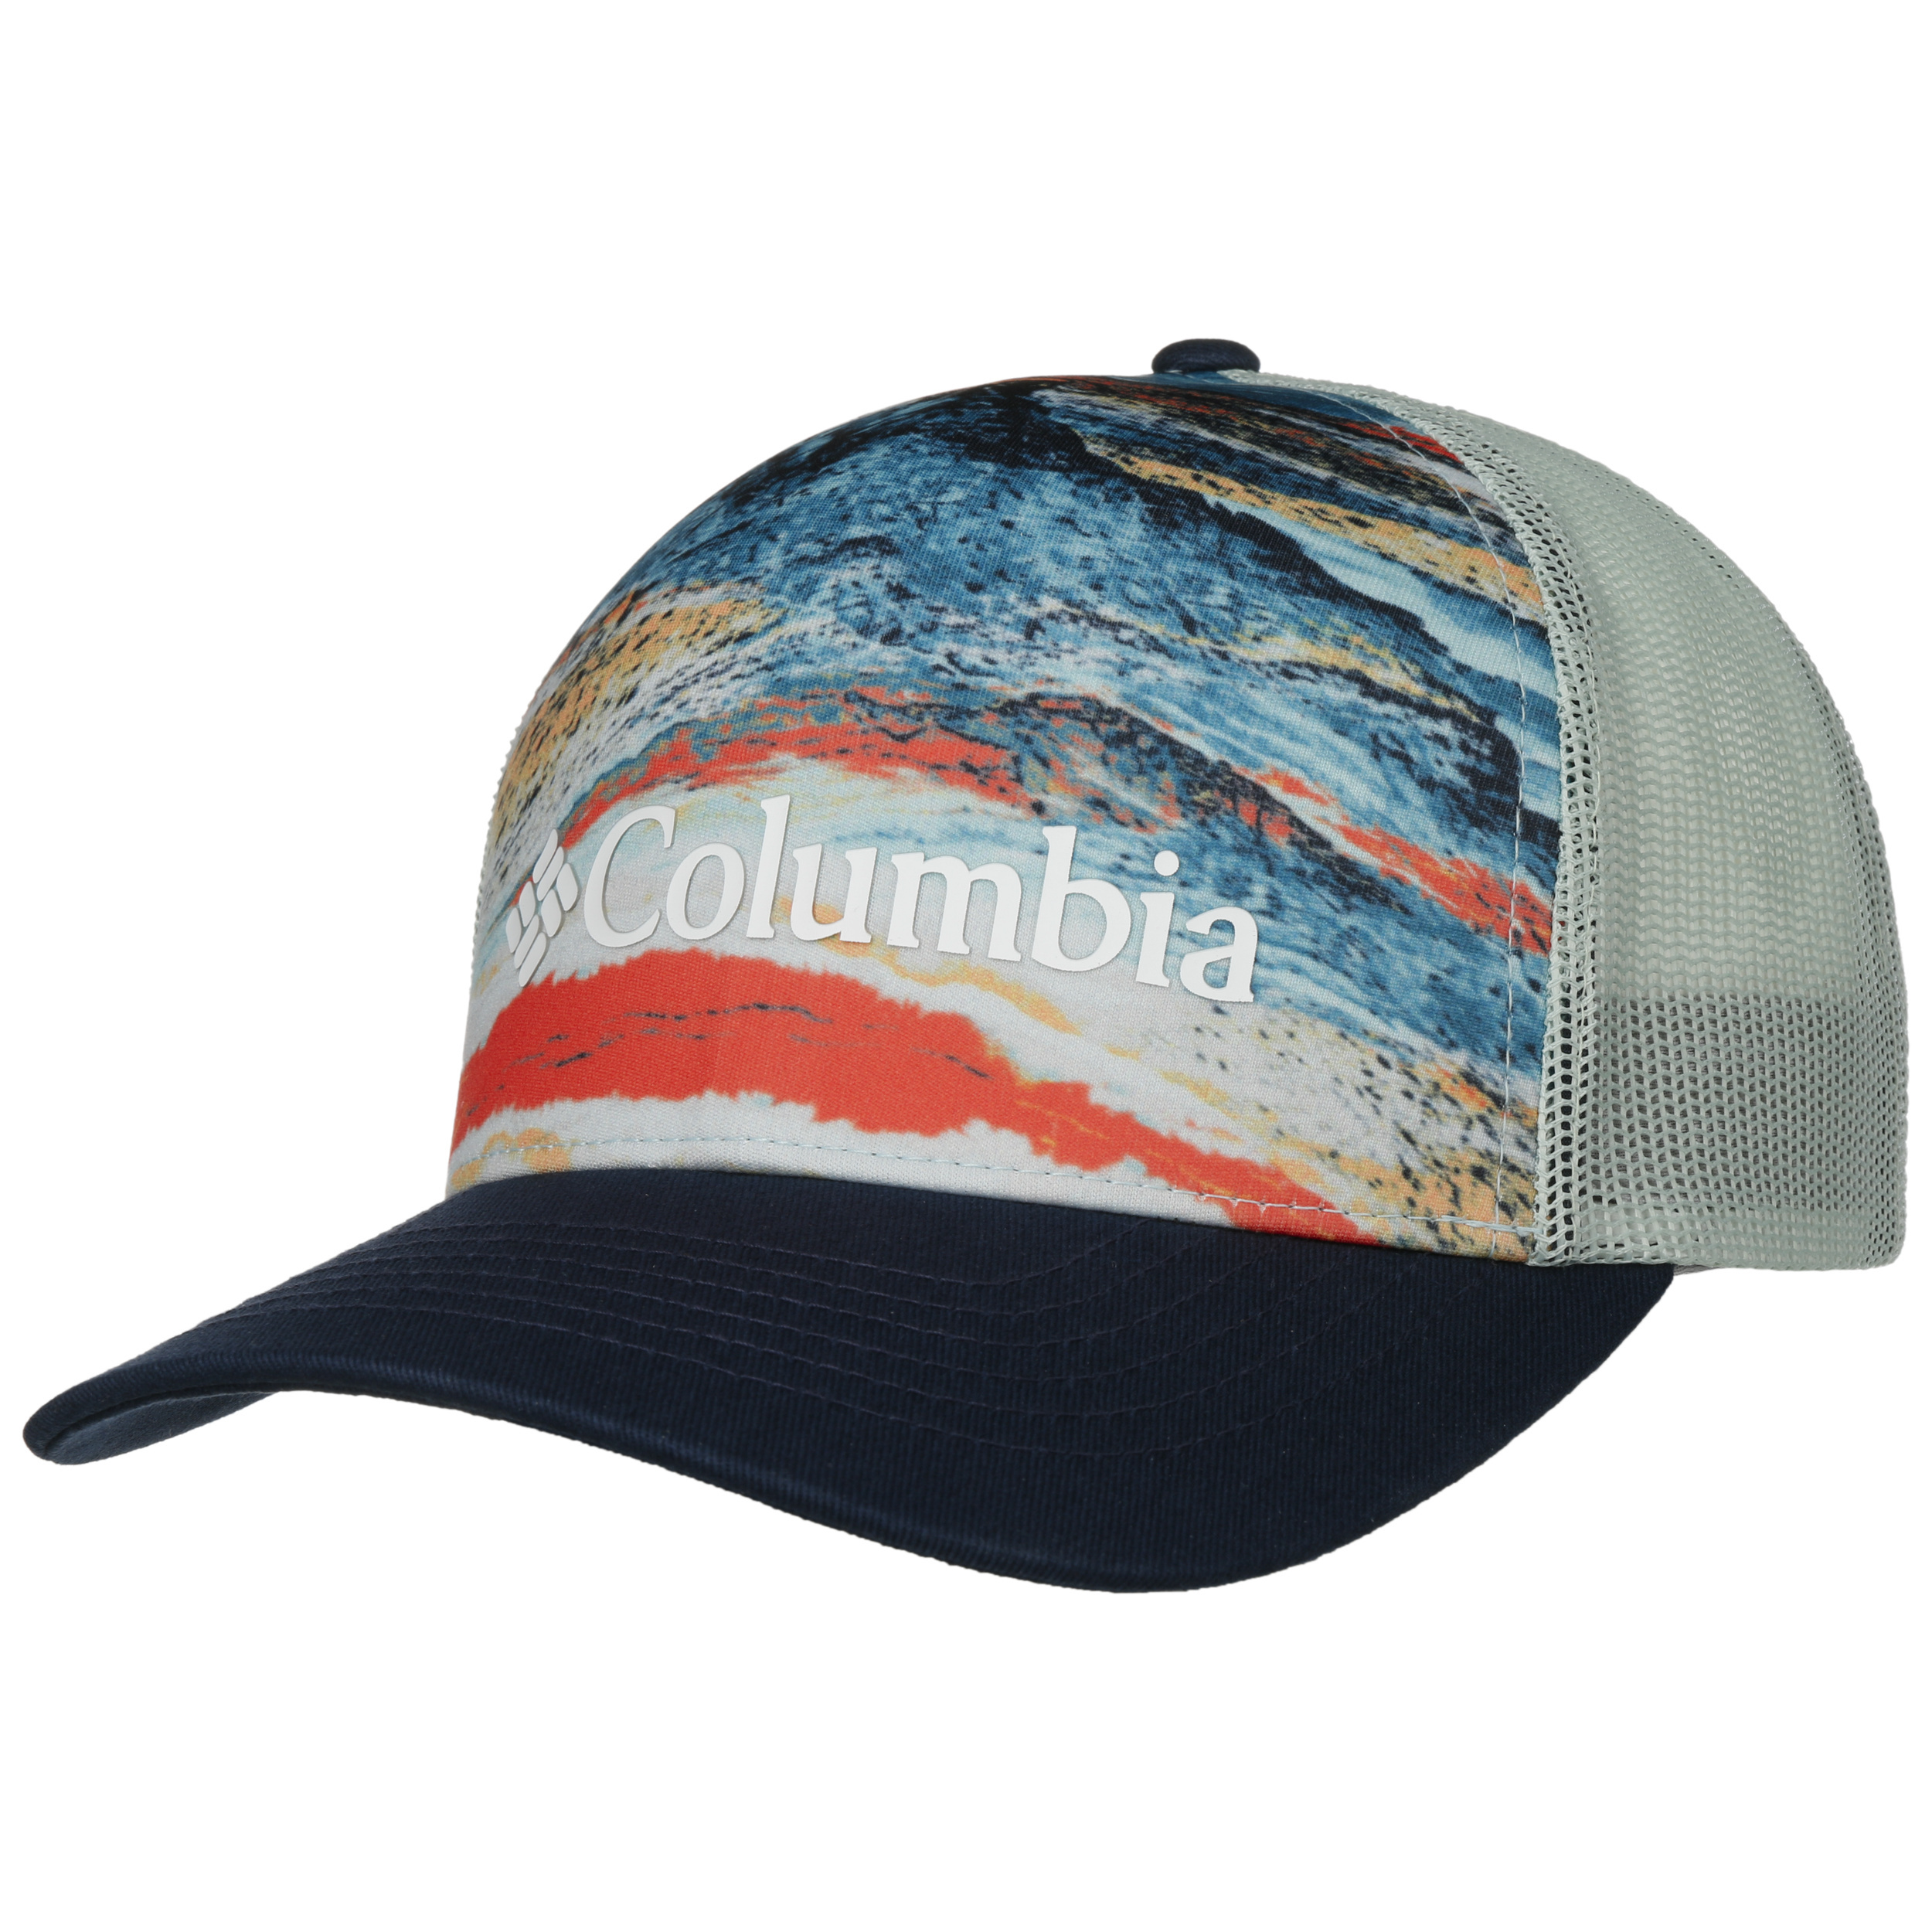 New Punchbowl Trucker Cap by Columbia - 28,95 £